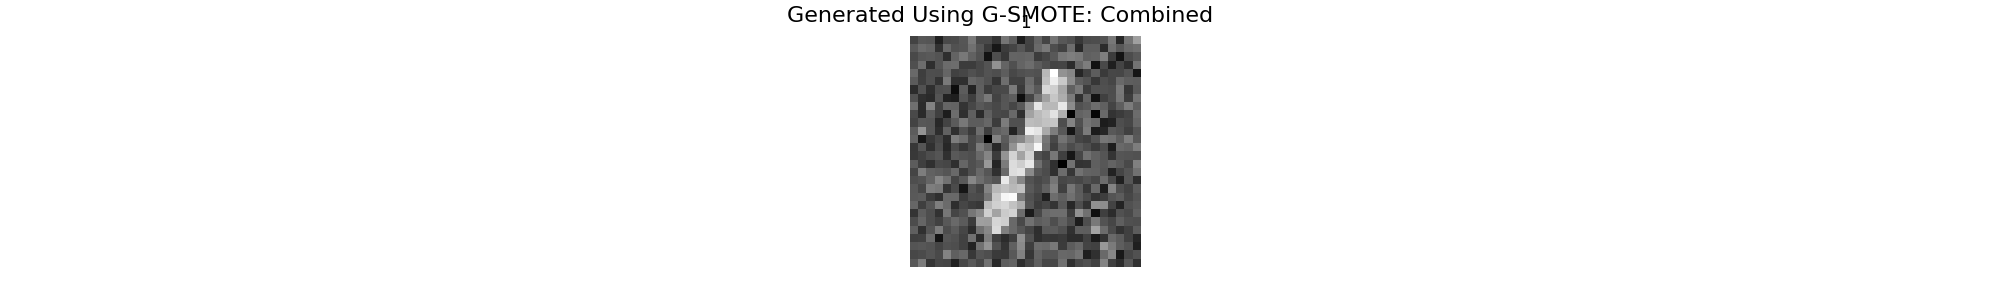 Generated Using G-SMOTE: Combined, 1